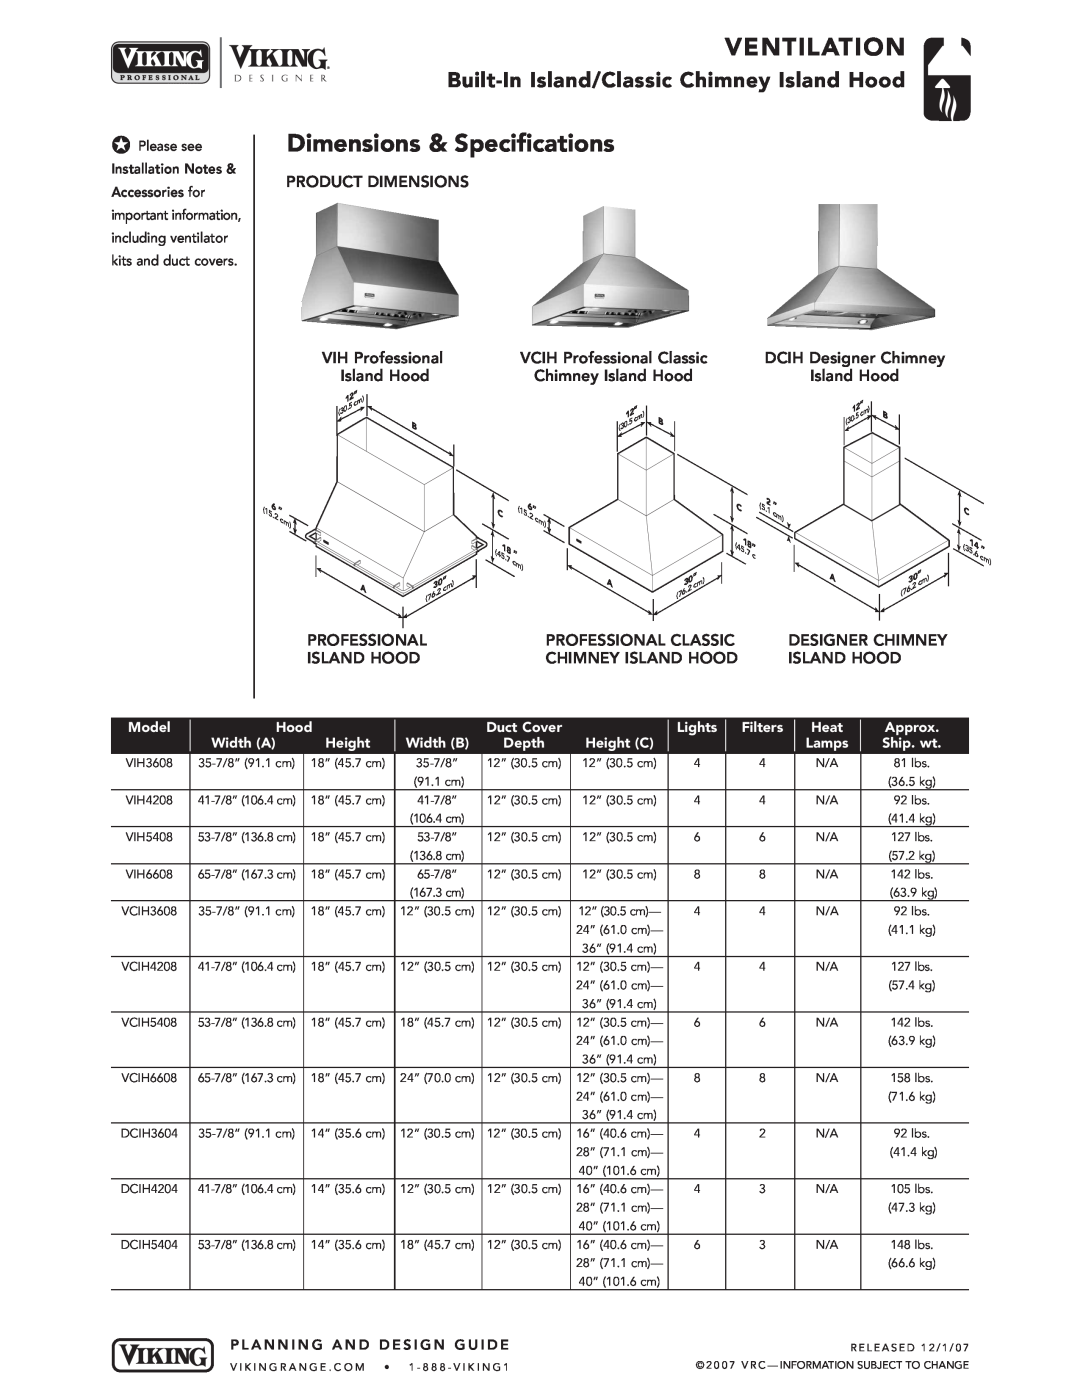 Viking DCIH Dimensions & Specifications, Ventilation, Built-In Island/Classic Chimney Island Hood, Model, Duct Cover, Heat 